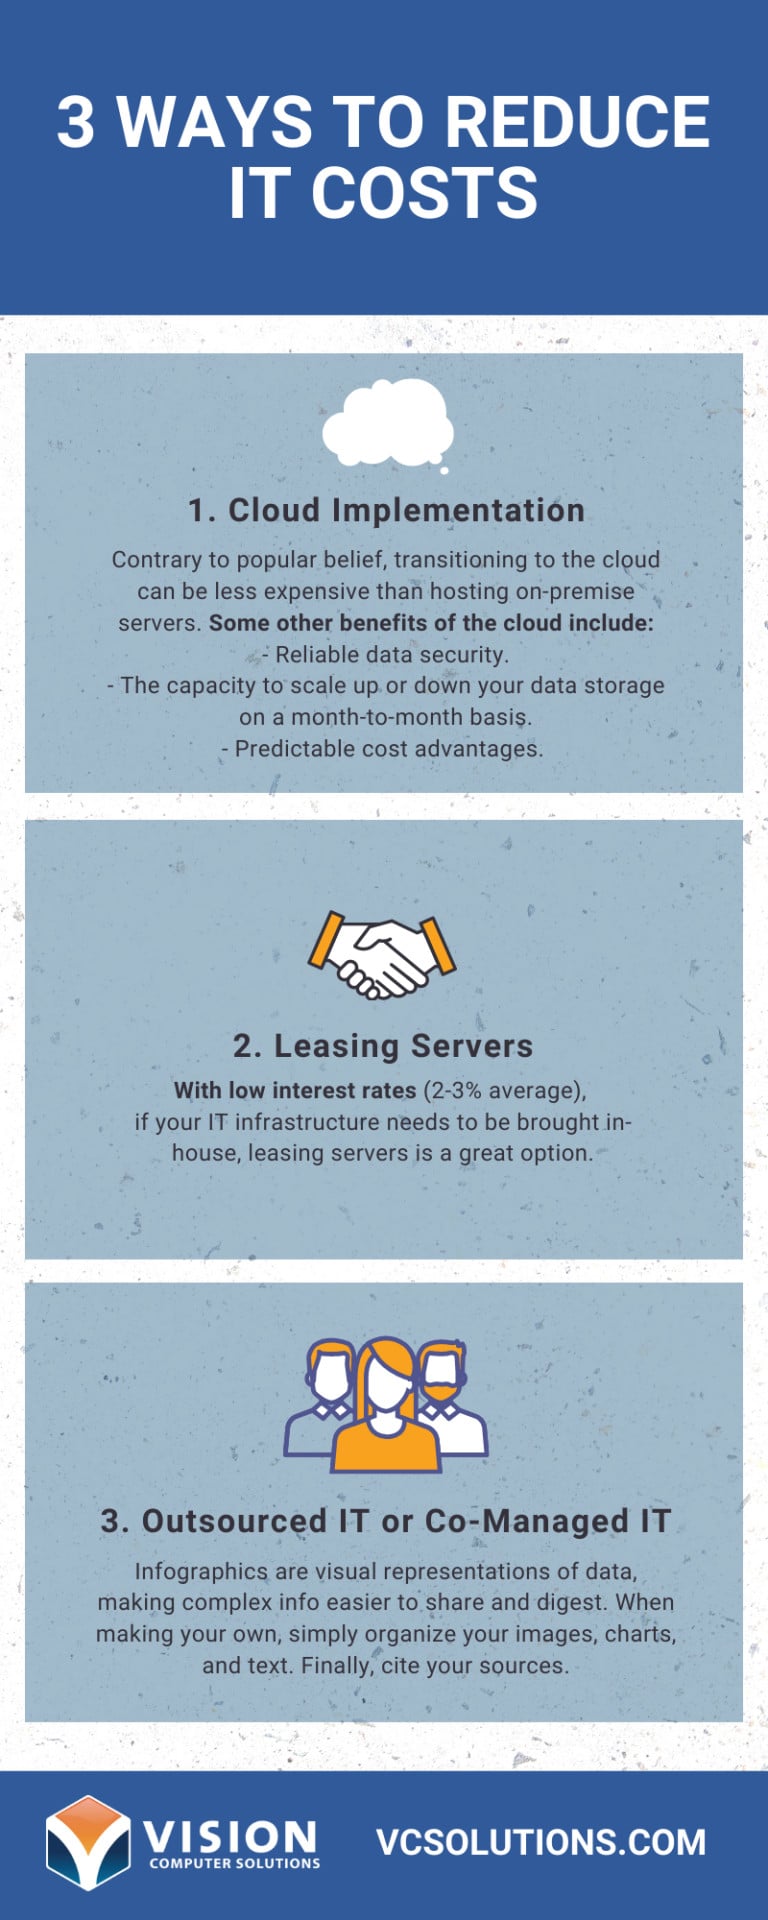 3 Ways to Reduce IT Costs Info Graphic